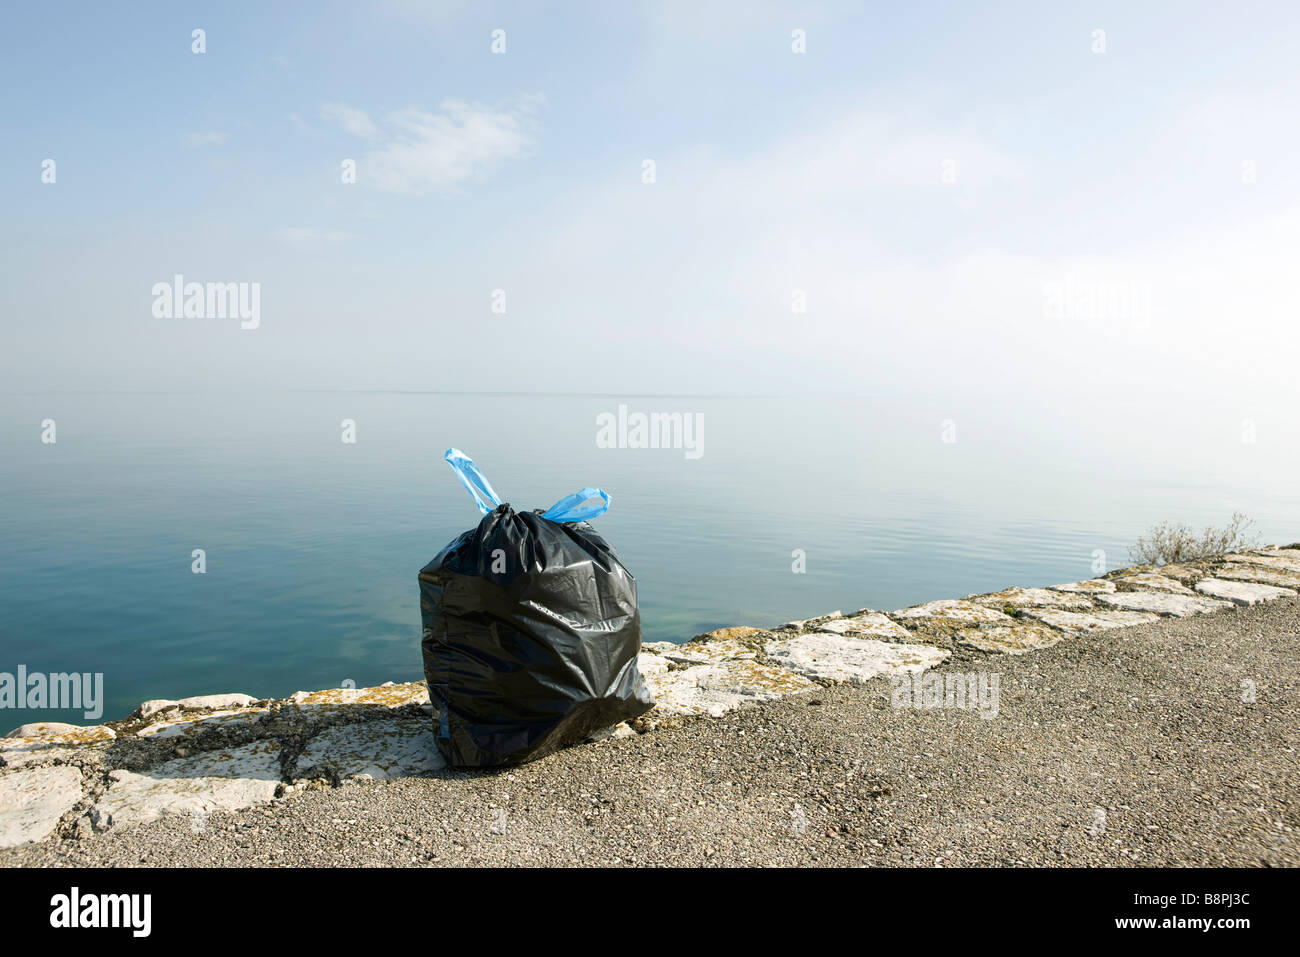 Garbage bag on ledge with sea in background Stock Photo